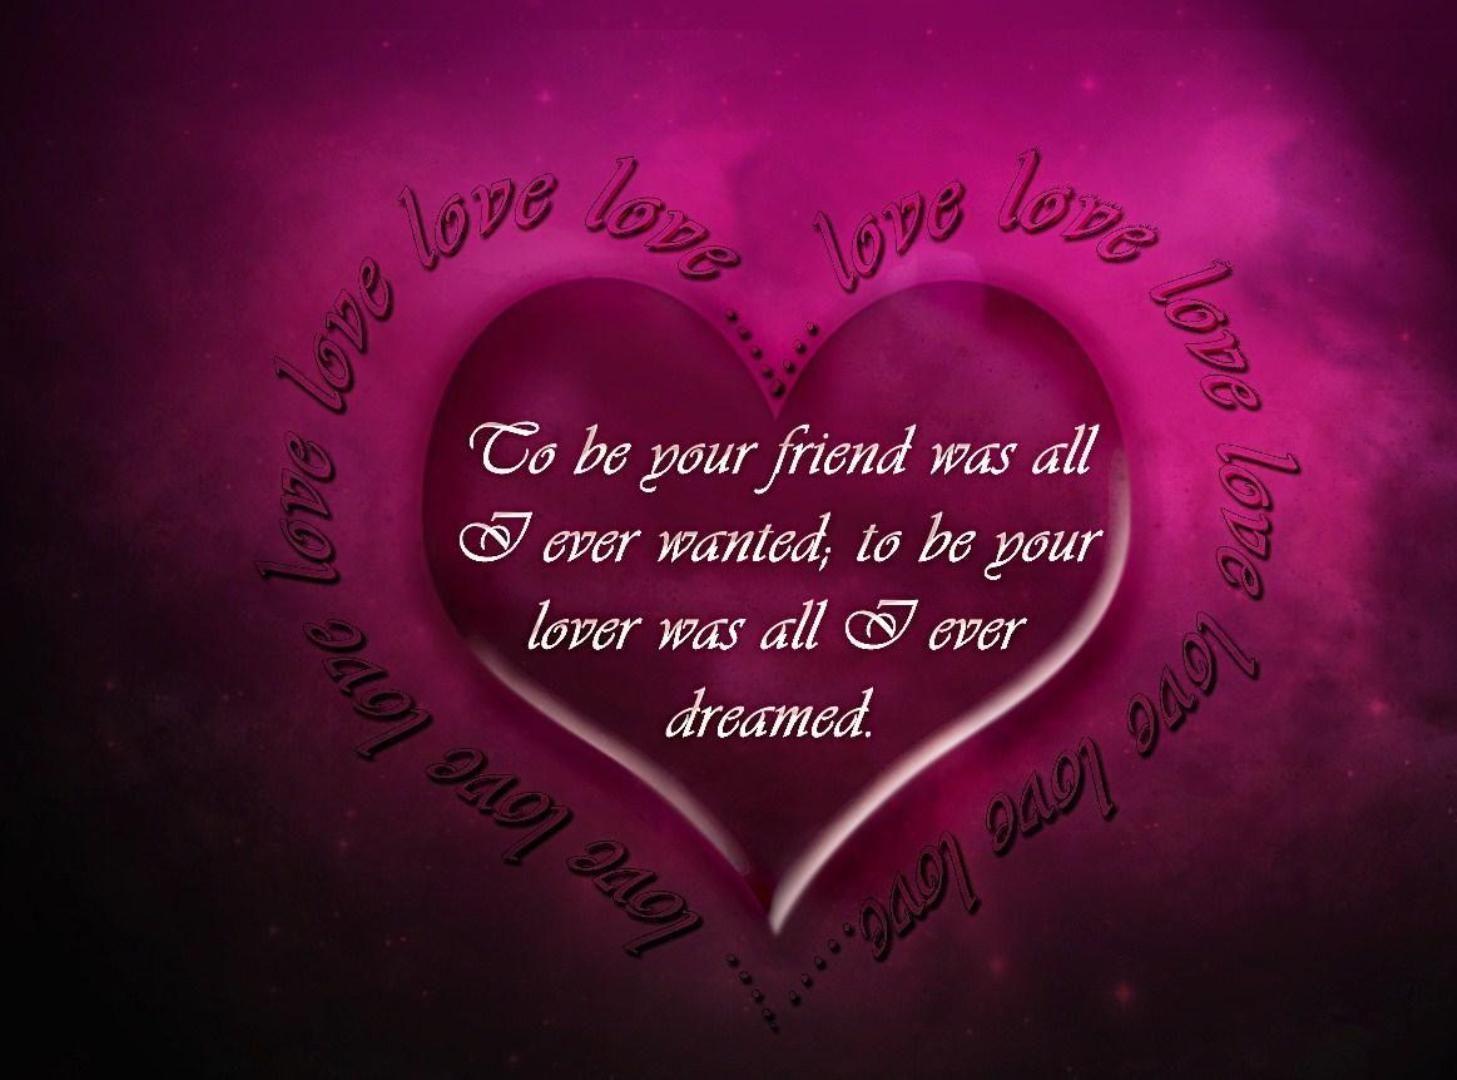 Happy Valentine's Day 2020: Romantic wishes, SMS, Quotes